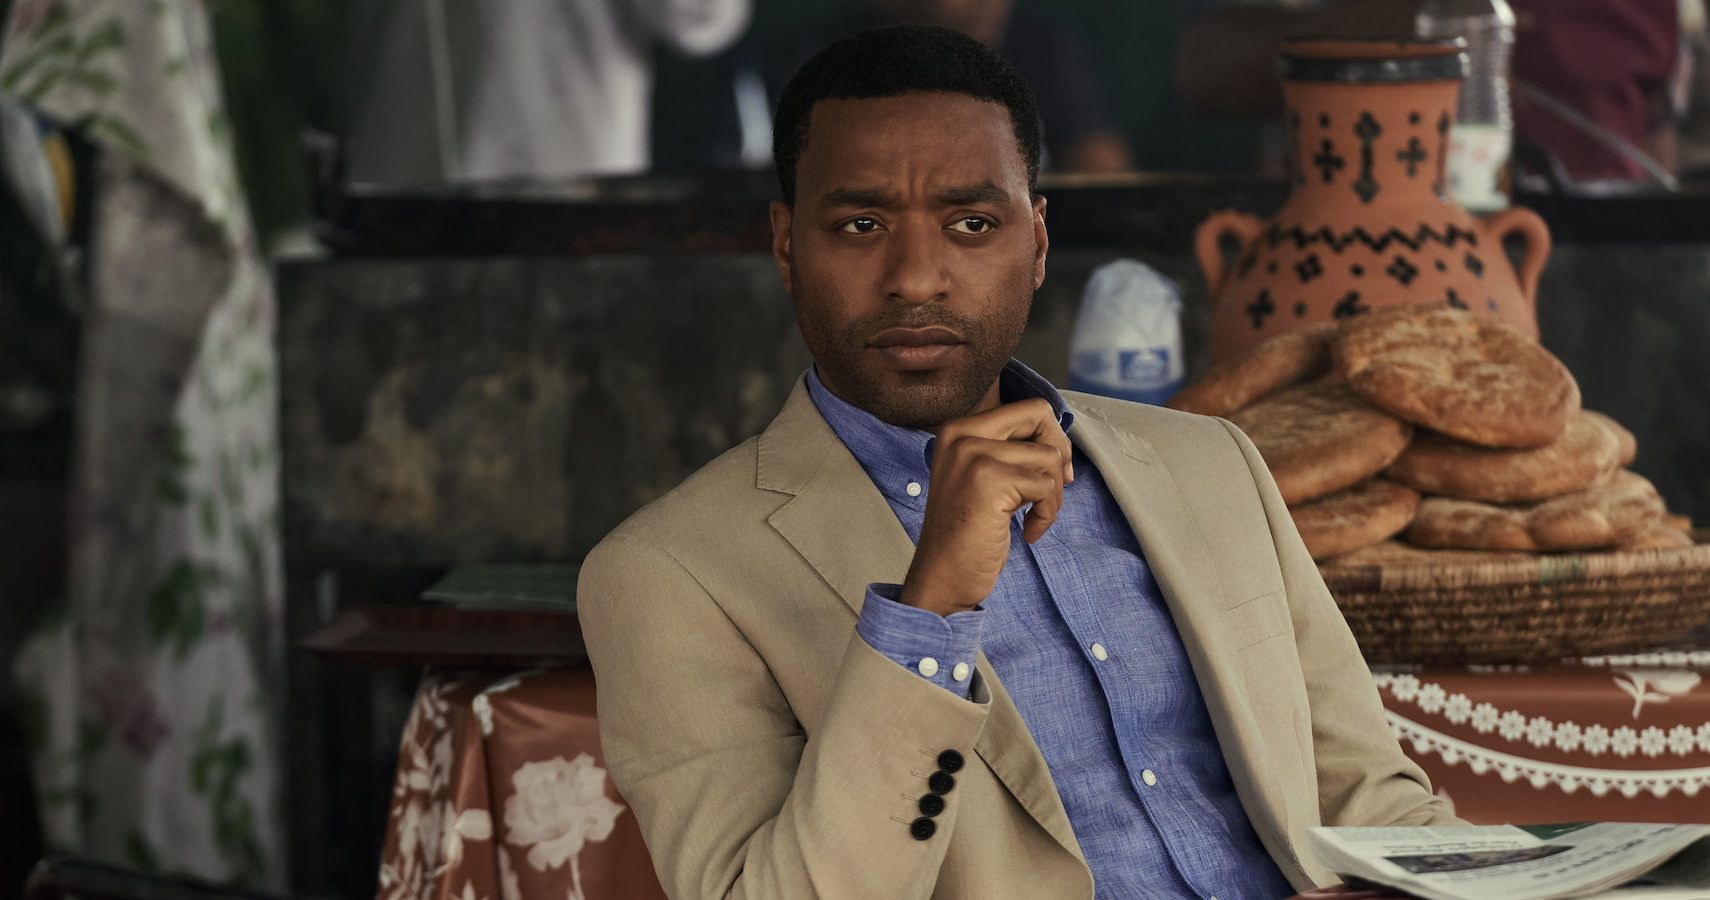 Chiwetel Ejiofor Thinks "The Old Guard" Is An Important Step Forward For Hollywood